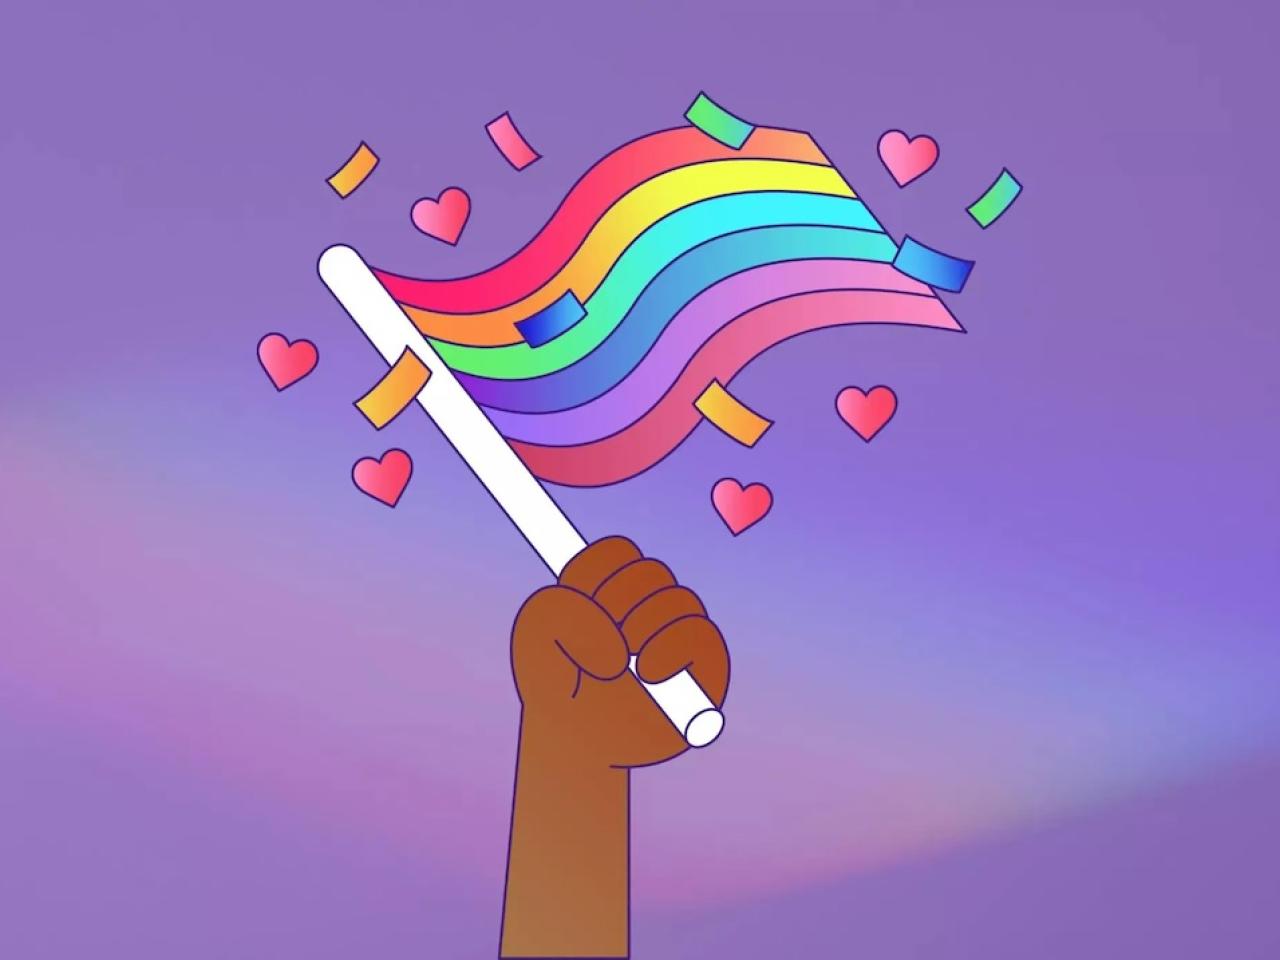 All about Pride. A hand is shown holding a Pride rainbow flag.